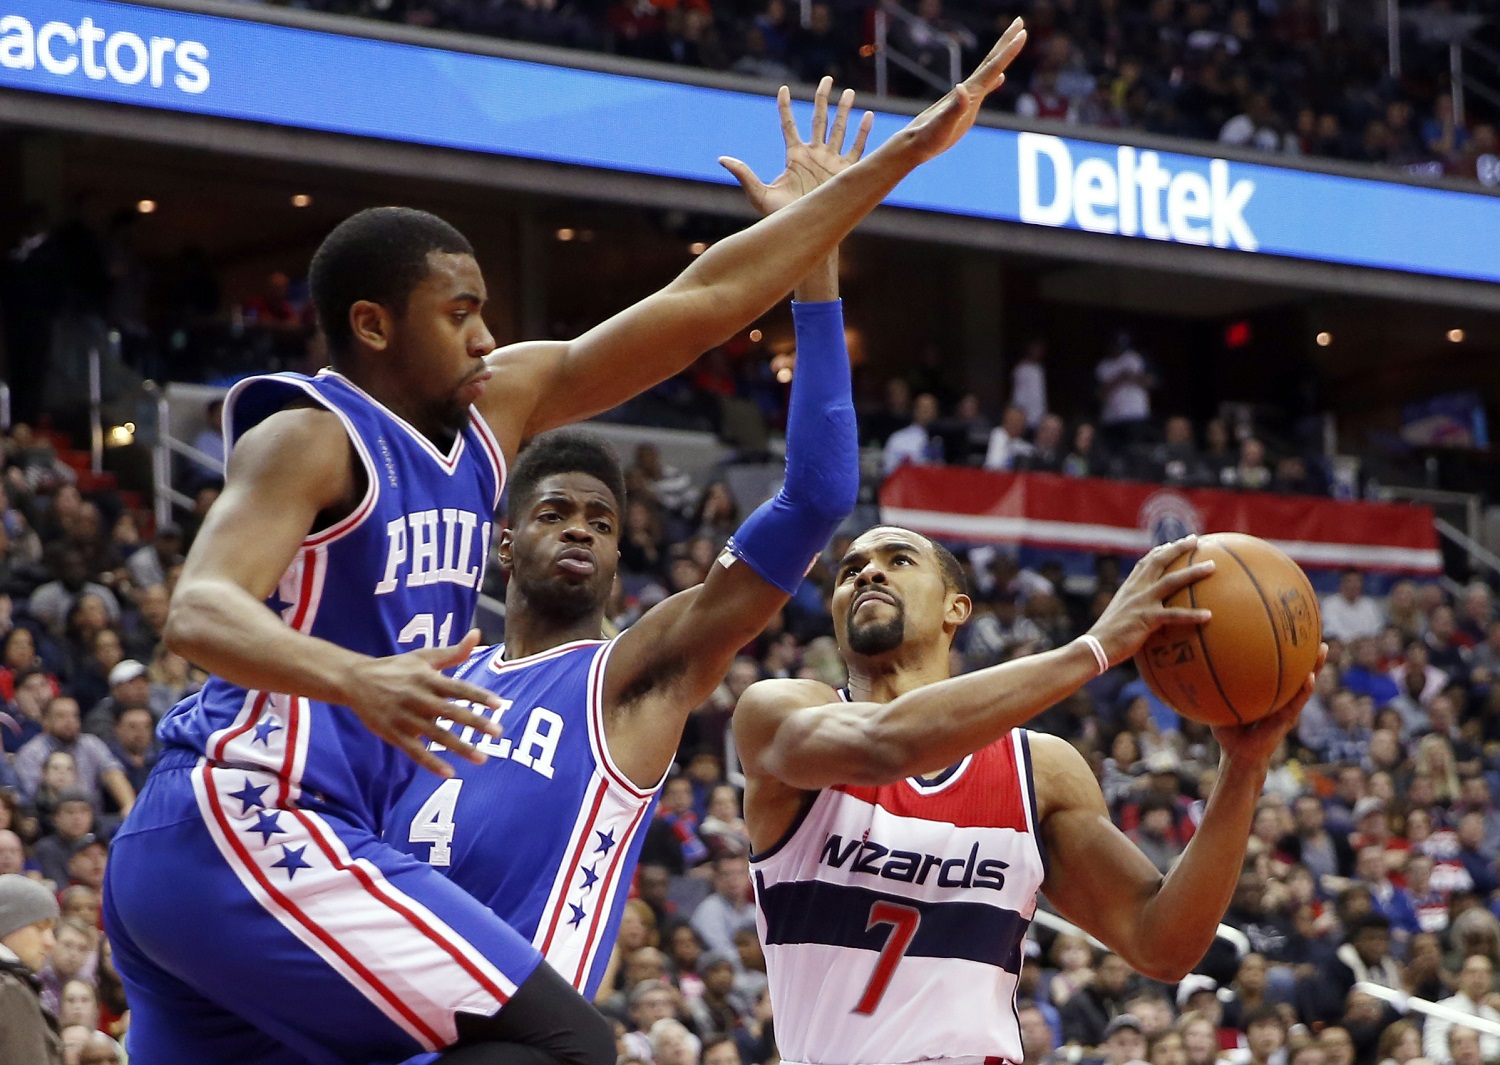 Philadelphia 76ers guard Hollis Thompson, left, and forward Nerlens Noel (4) defend Washington Wizards guard Ramon Sessions (7) during the second half of an NBA basketball game, Friday, Feb. 5, 2016, in Washington. The Wizards won 106-94. (AP Photo/Alex Brandon)